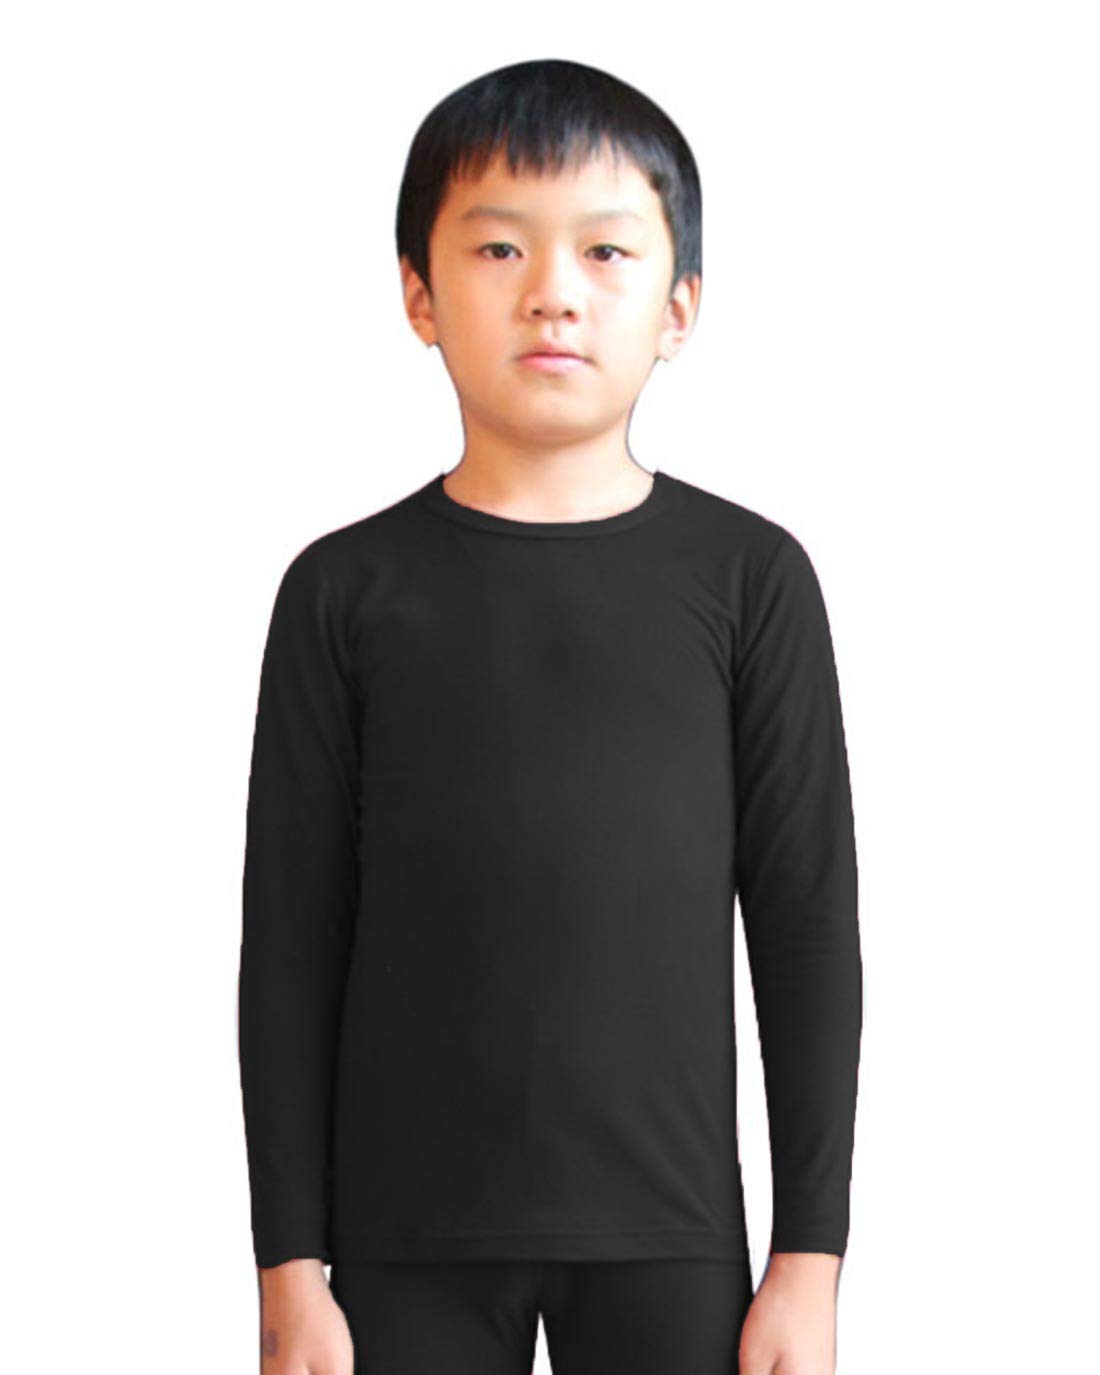 Unisex Kids Long Sleeve Winter Sports Base Layers & Thermals for sale